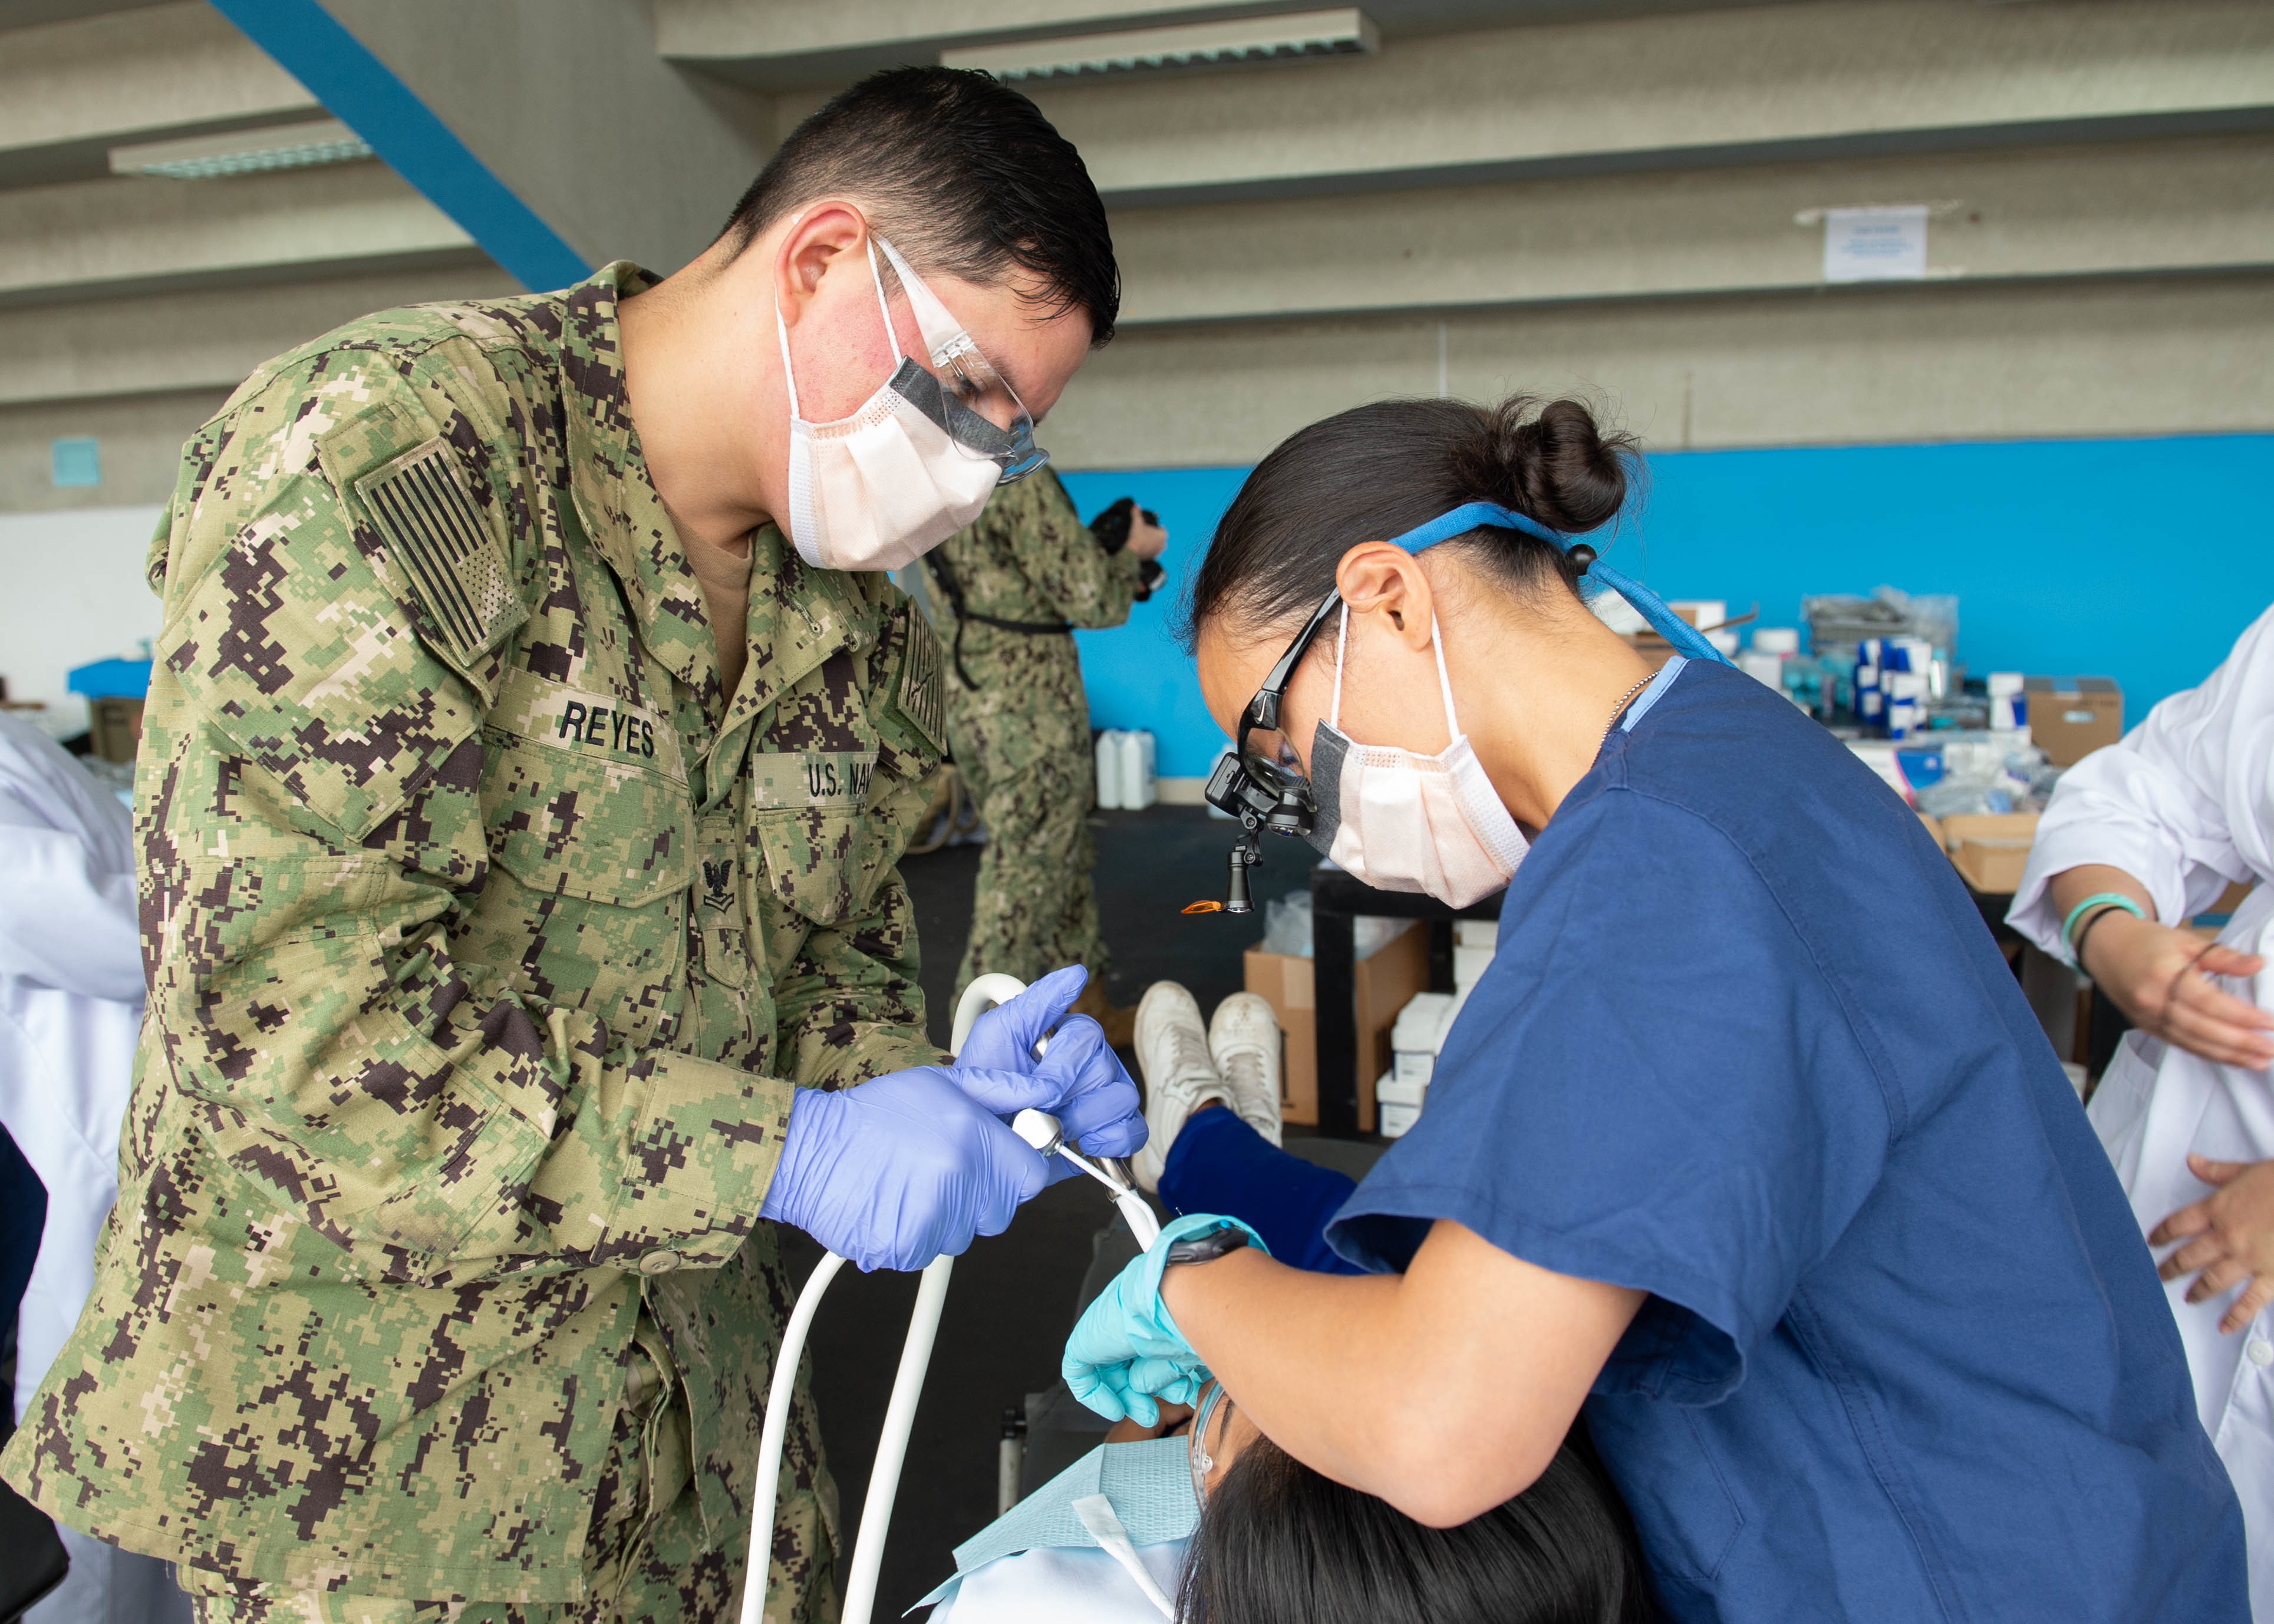 Hospital Corpsman 2nd Class Jose L. Reyes, from Lancaster, Calif., assigned to the hospital ship USNS Comfort (T-AH 20), left, and Lt. Vy Vy Vu (right), a U.S. Public Health Service dentist, treat a patient for dental care at a temporary medical site near Callao, Peru, on July 9, 2019. (U.S. Navy photo by Mass Communication Specialist 3rd Class Maria G. Llanos)